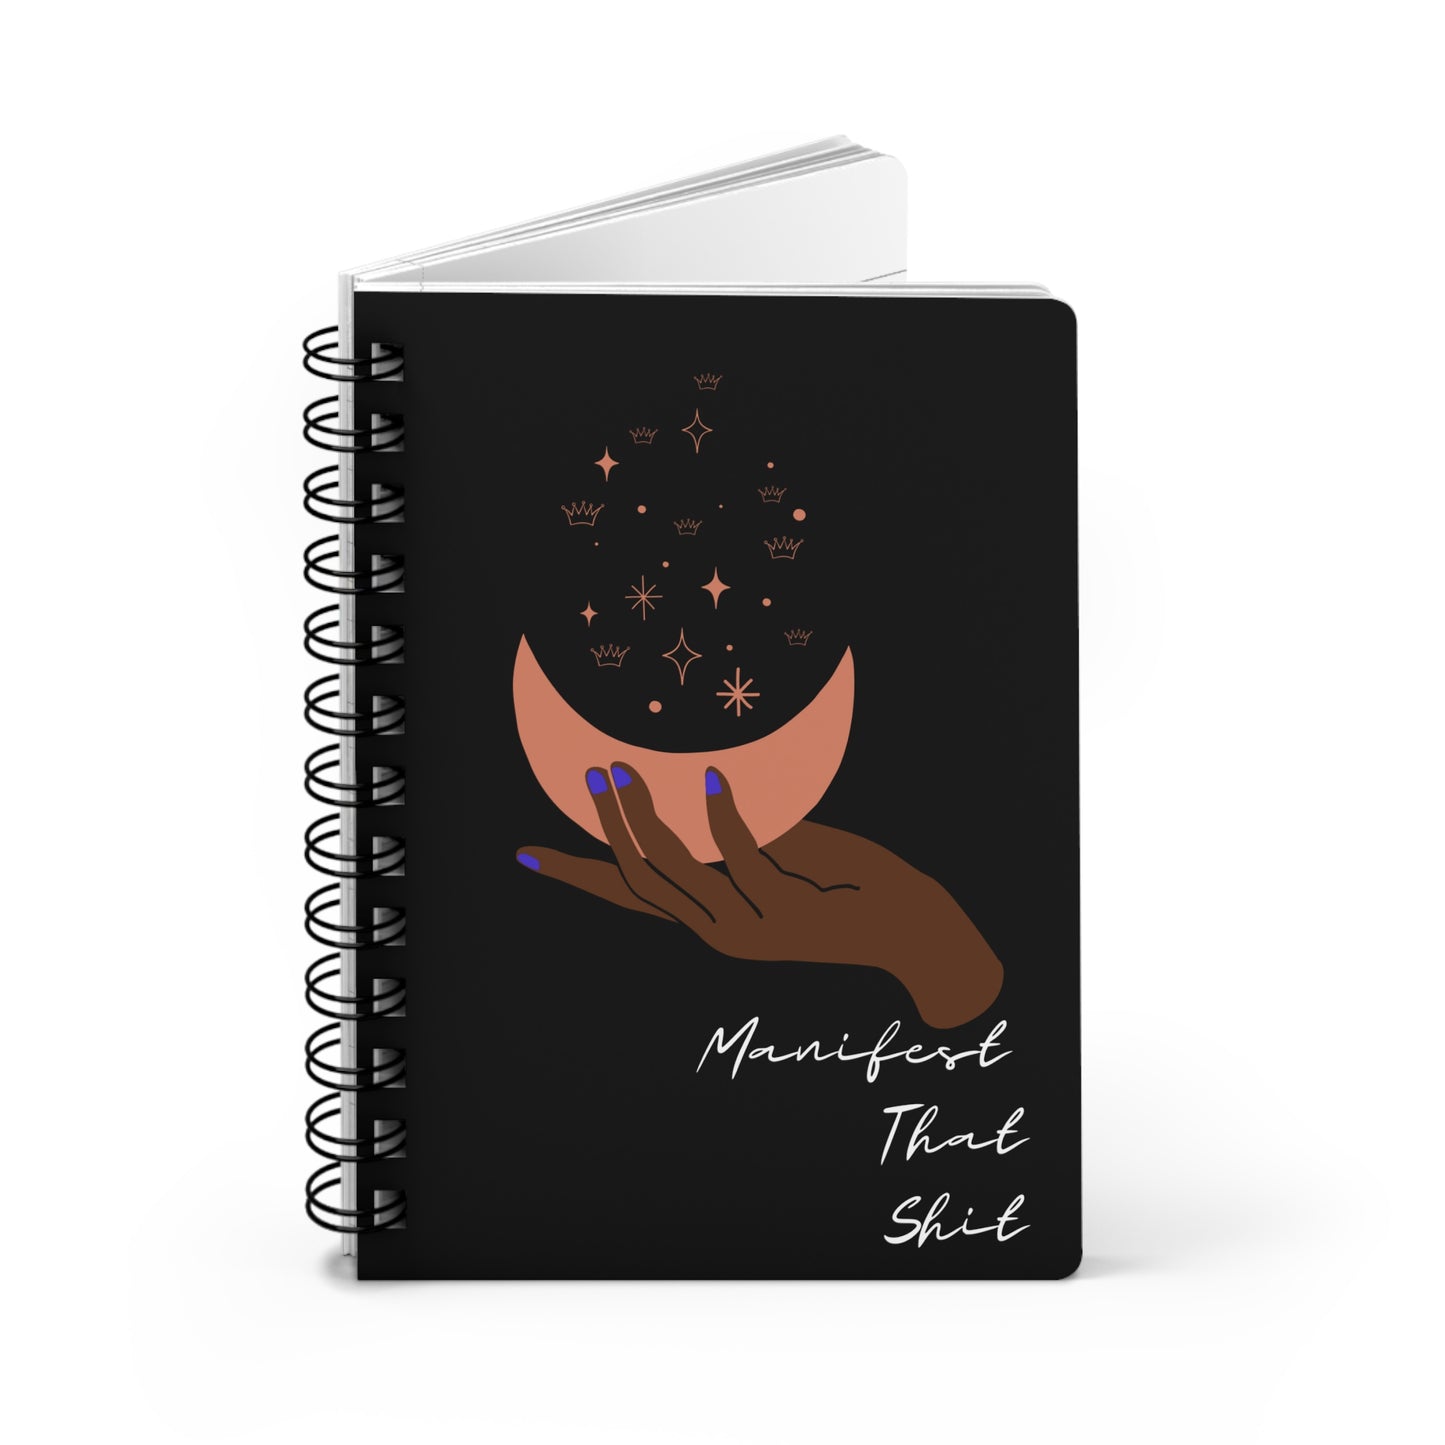 A black spiral notebook with a hand holding a moon and stars, perfect for "Manifest That Shit" Manifesting Journal to Access Your Inner Power.